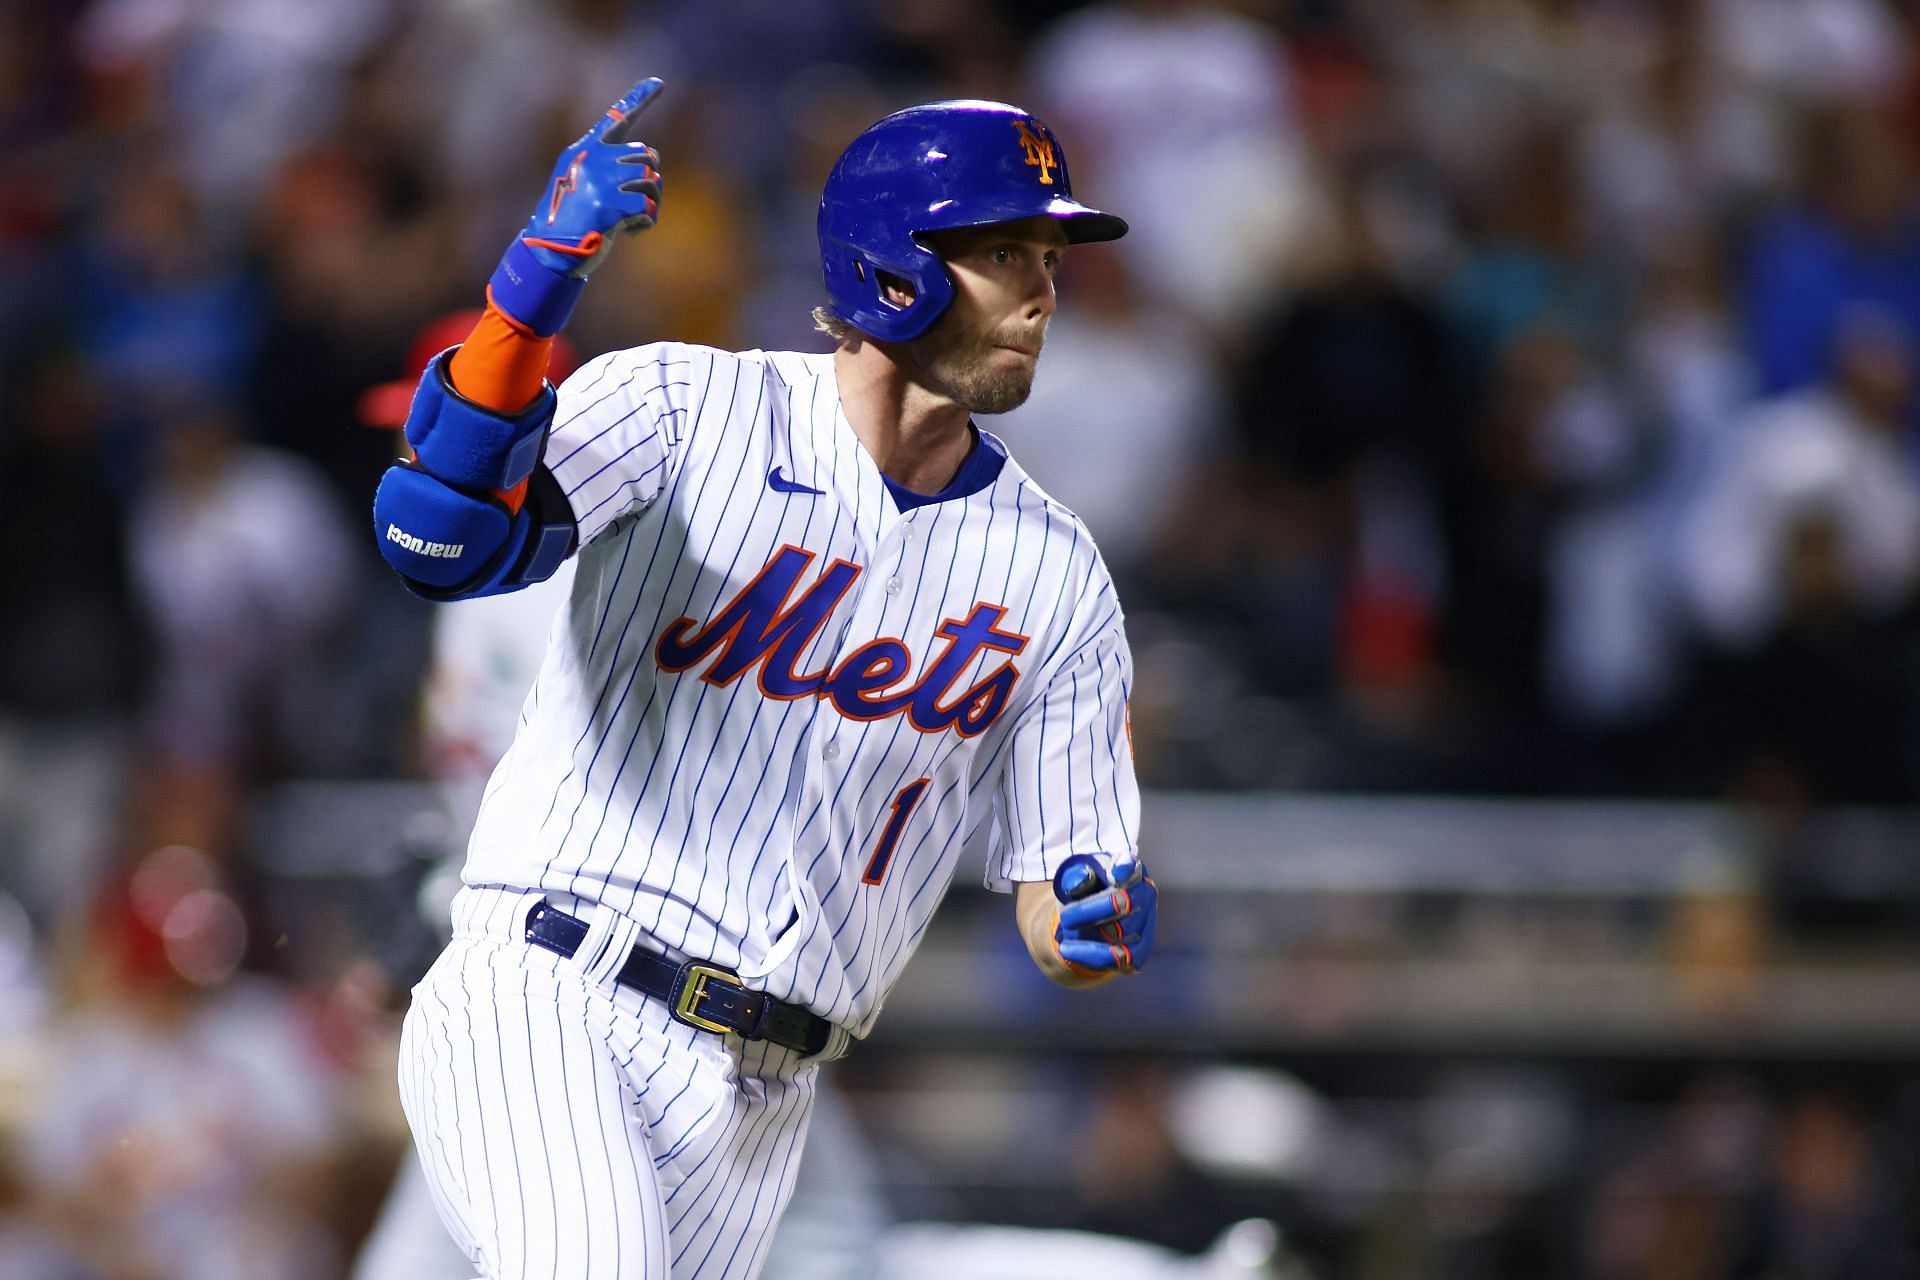 Two steps back: Yankees blown out by Mets in Mediocre Bowl